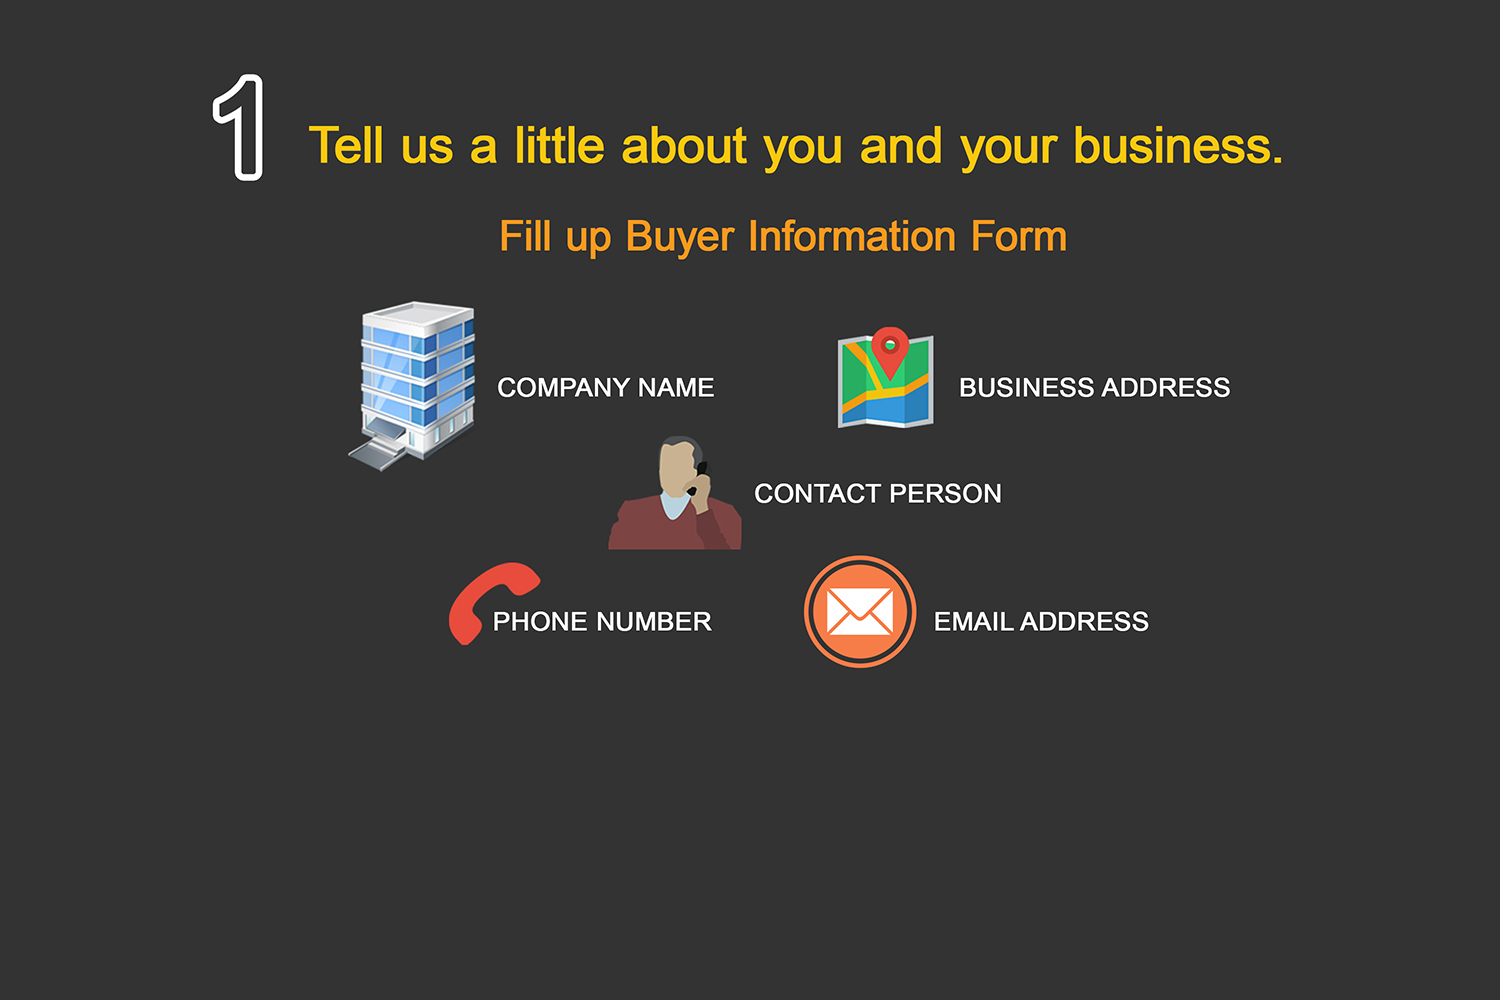 Complete the Buyers Information form by giving us the name of your company, contact person, business address, contact details, and e-mail address.